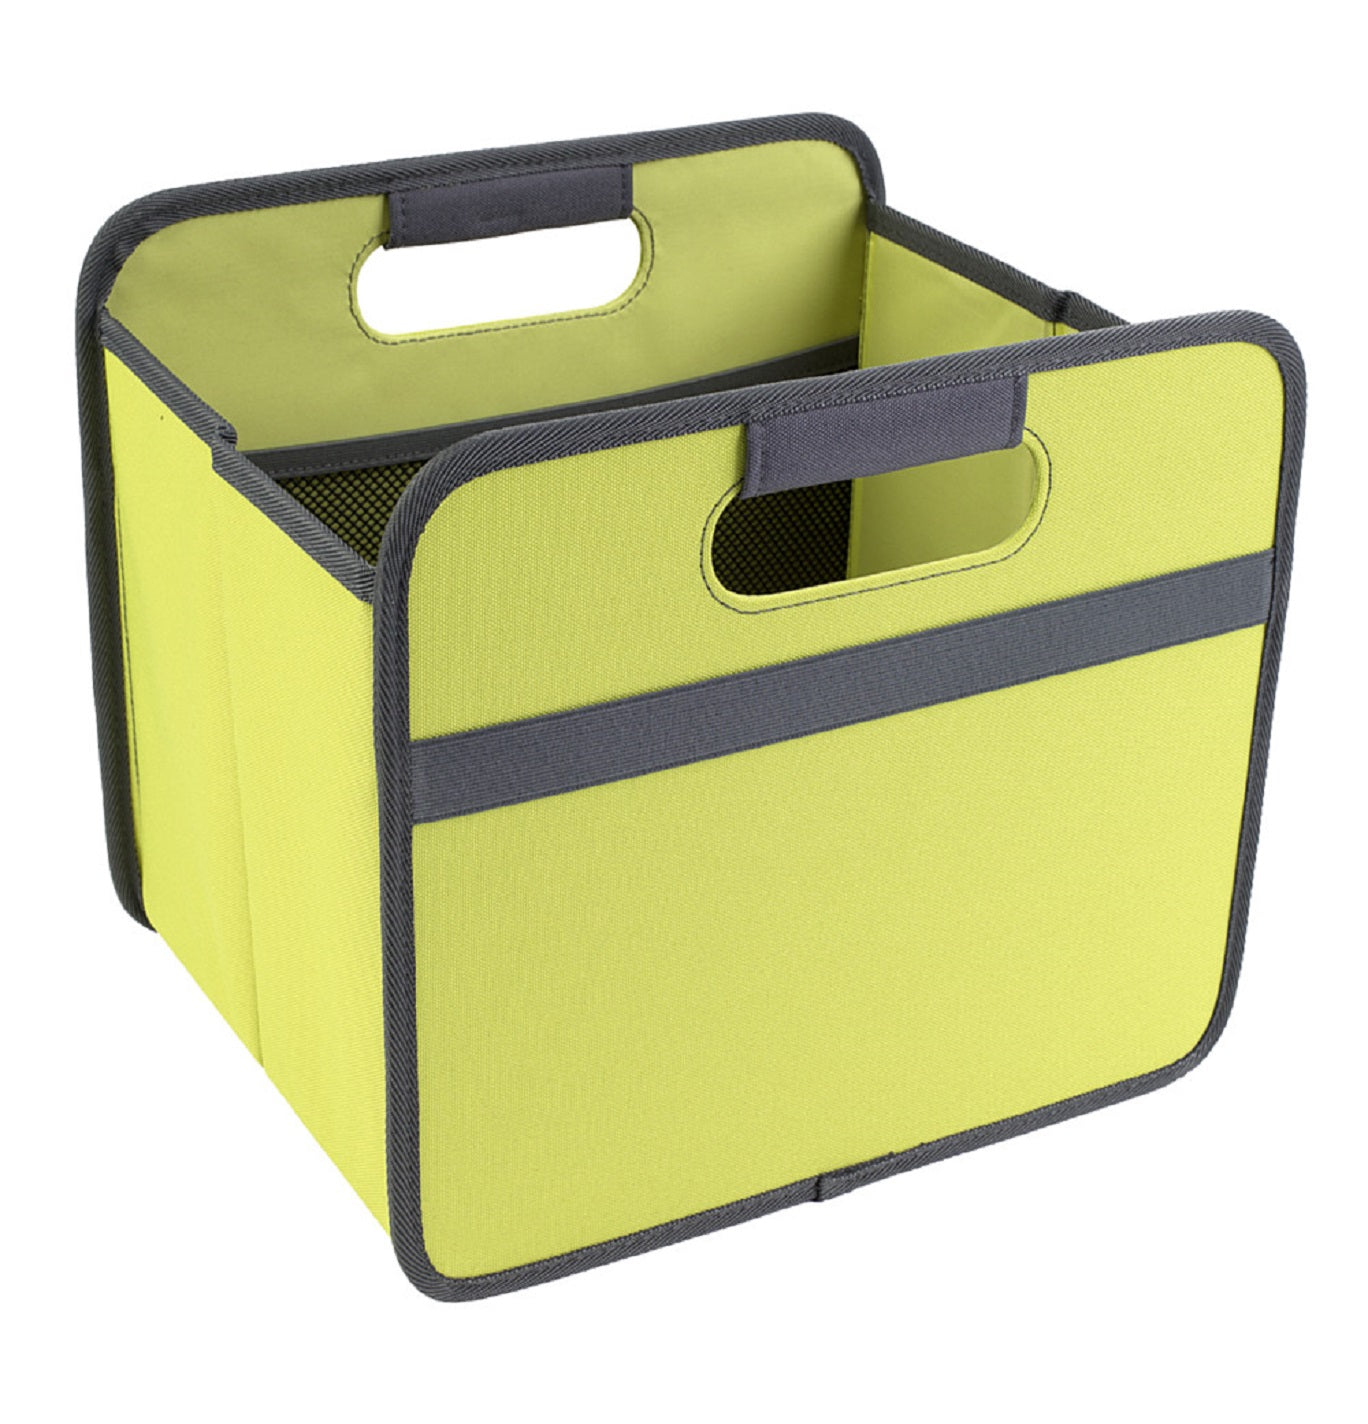 Meori® Small 15L Green Outdoor Foldable Storage Box – The Camperco